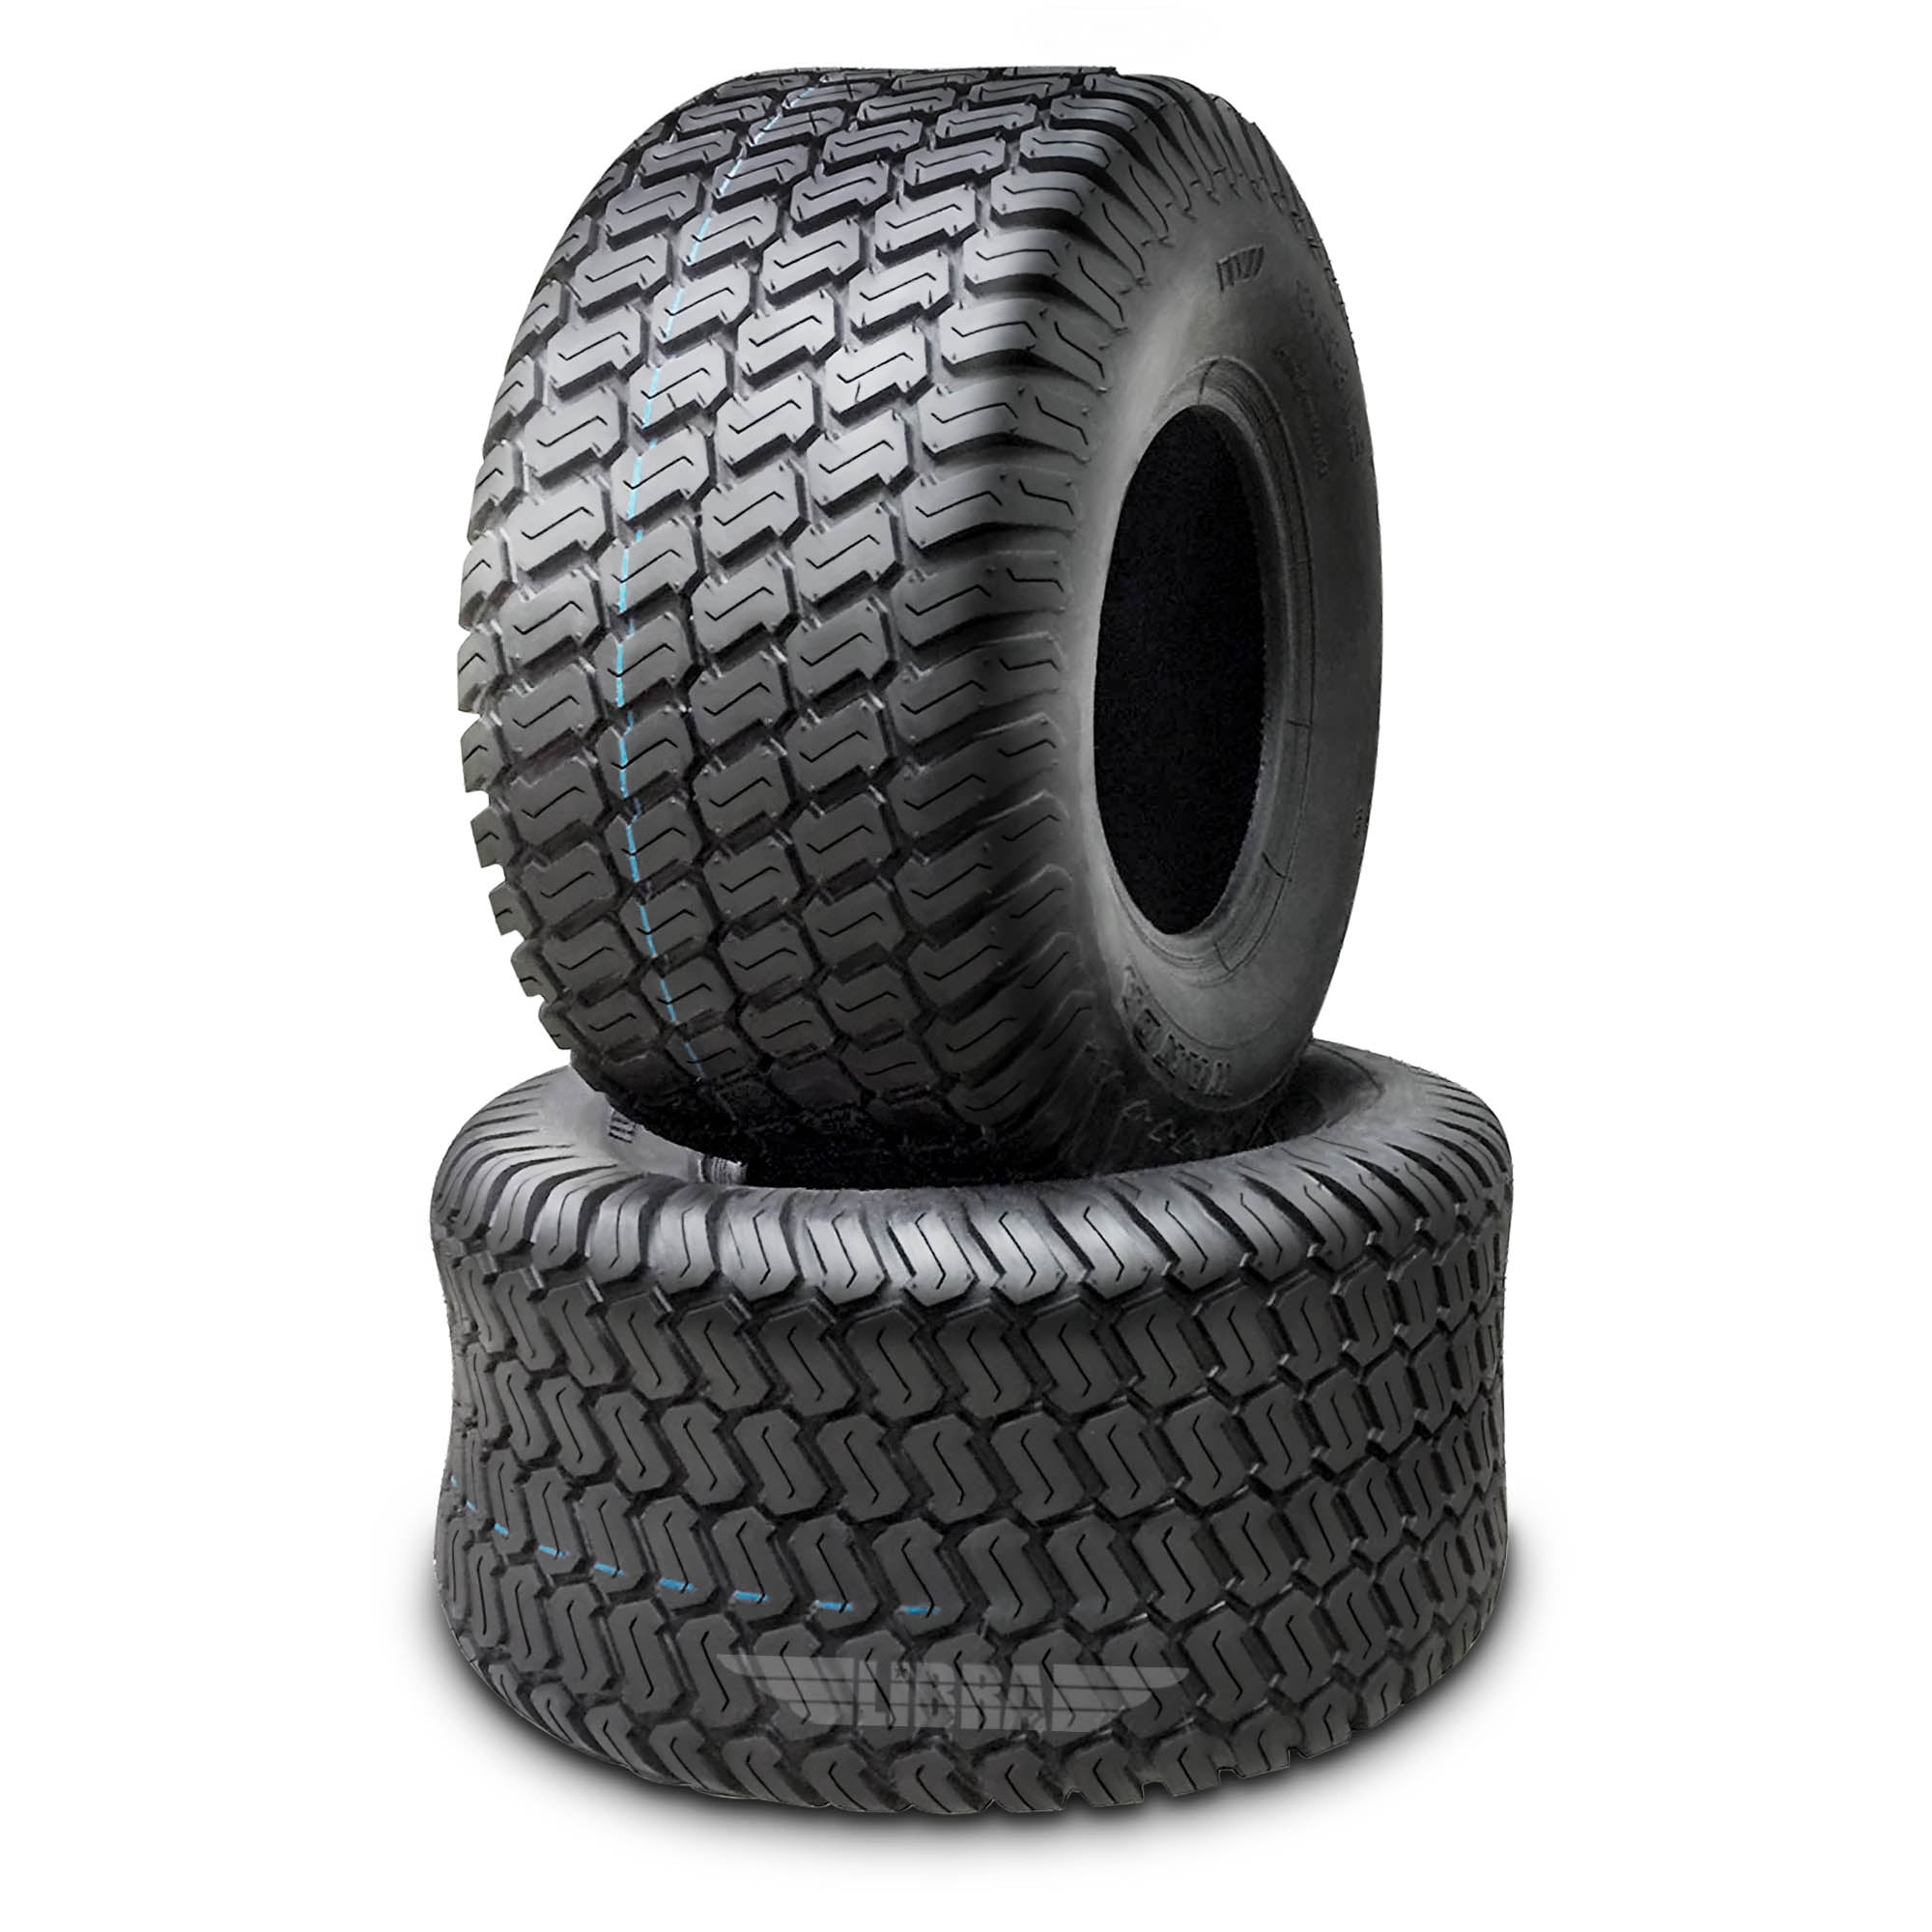 Turf Tire 2 Ply Tubeless Great Traction 16 X 6.50-8 Lawn Mowers Tractor New 